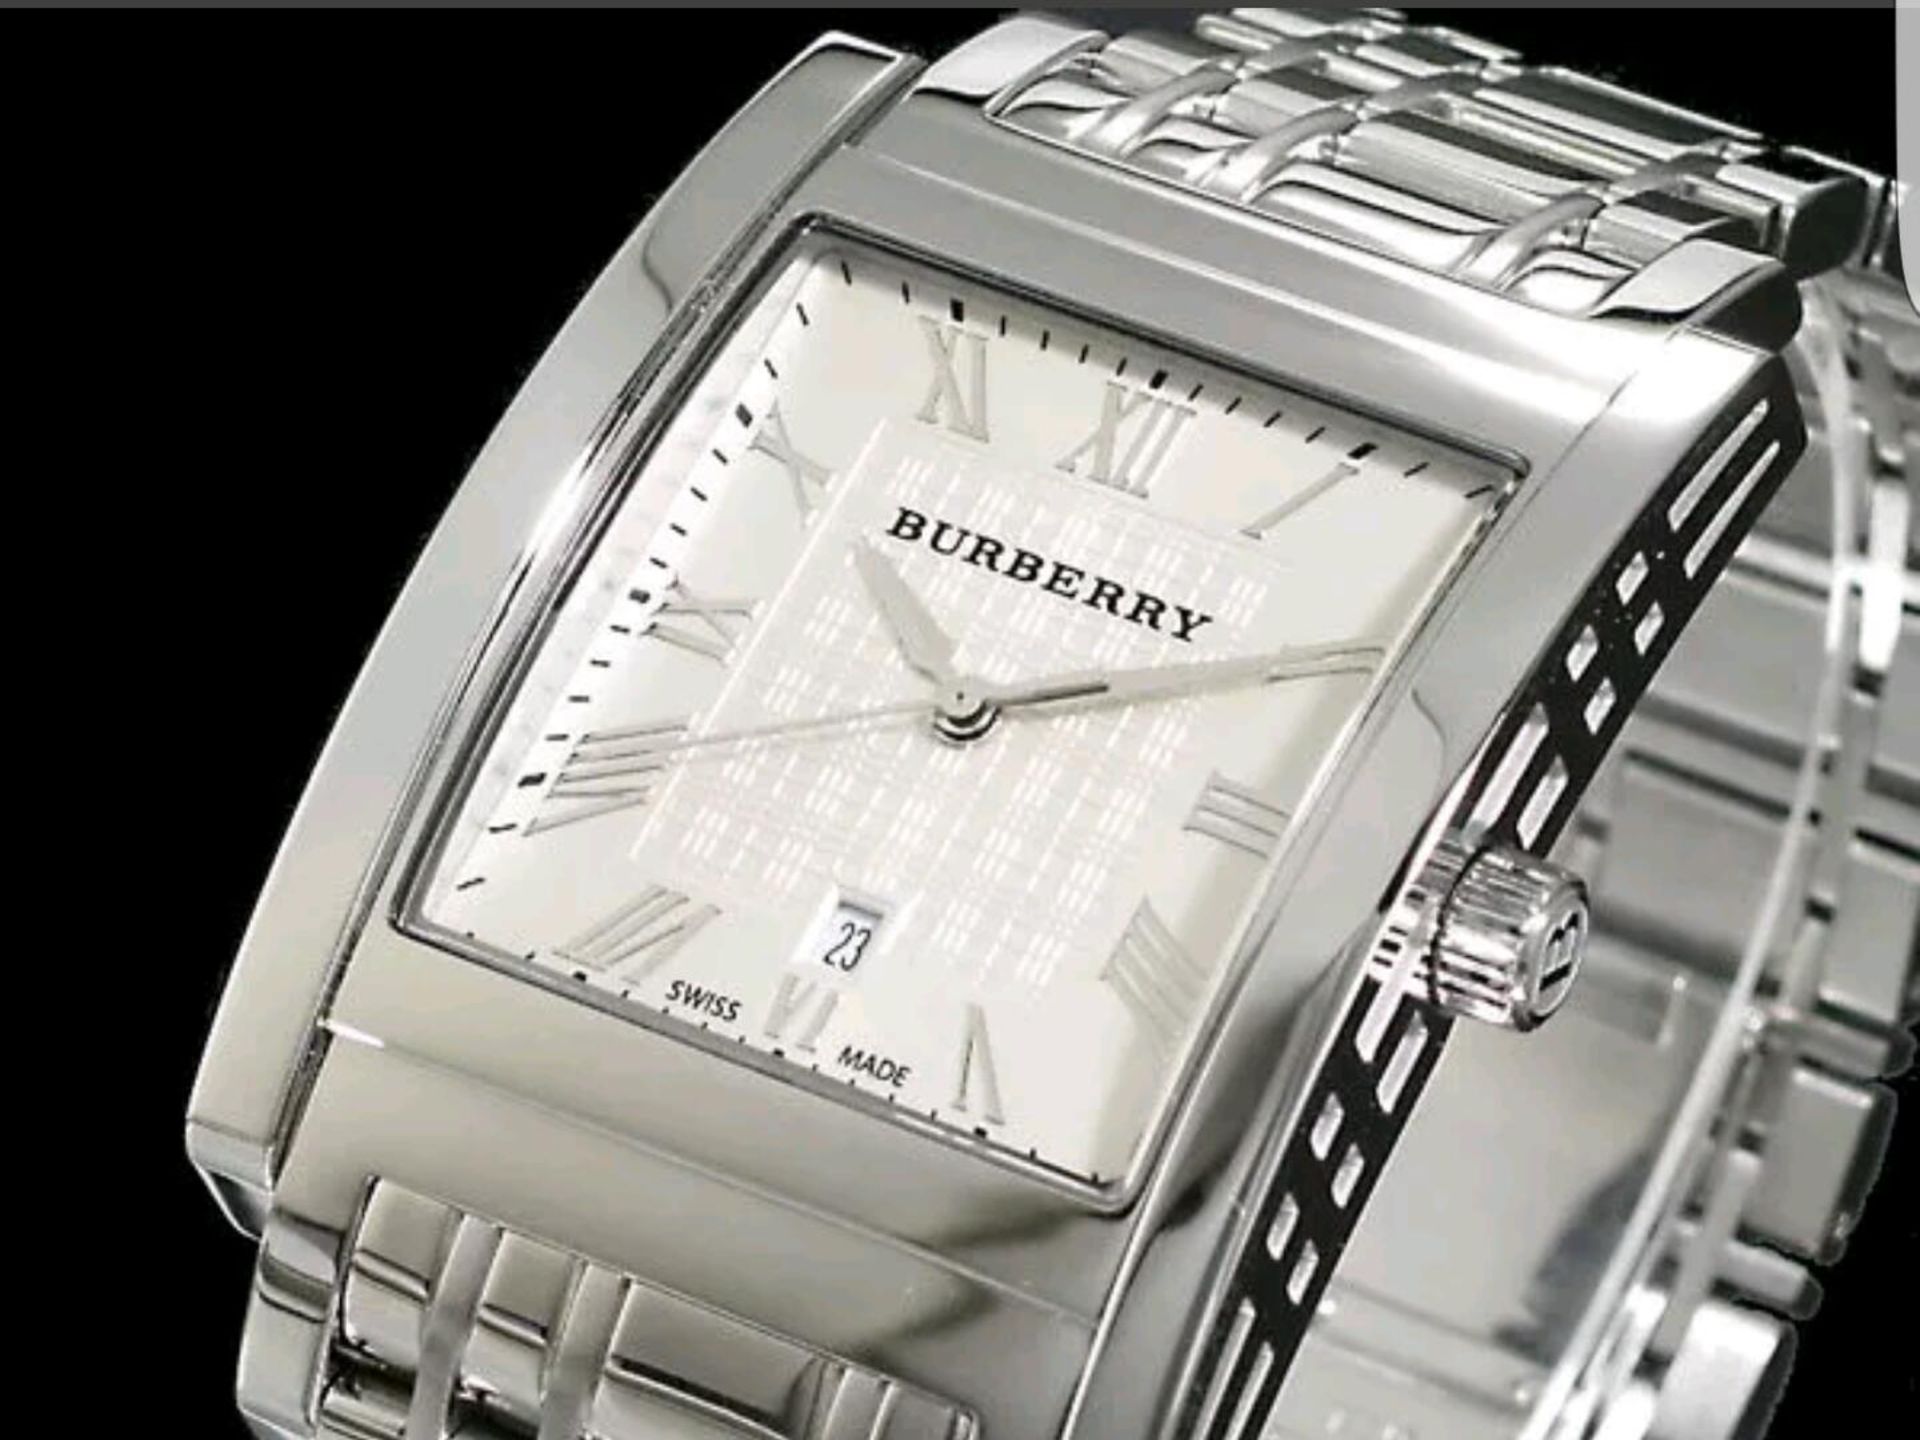 BRAND NEW GENTS BURBERRY WATCH, BU1550, COMPLETE WITH ORIGINAL BOX AND MANUAL - RRP £399 - Image 2 of 2